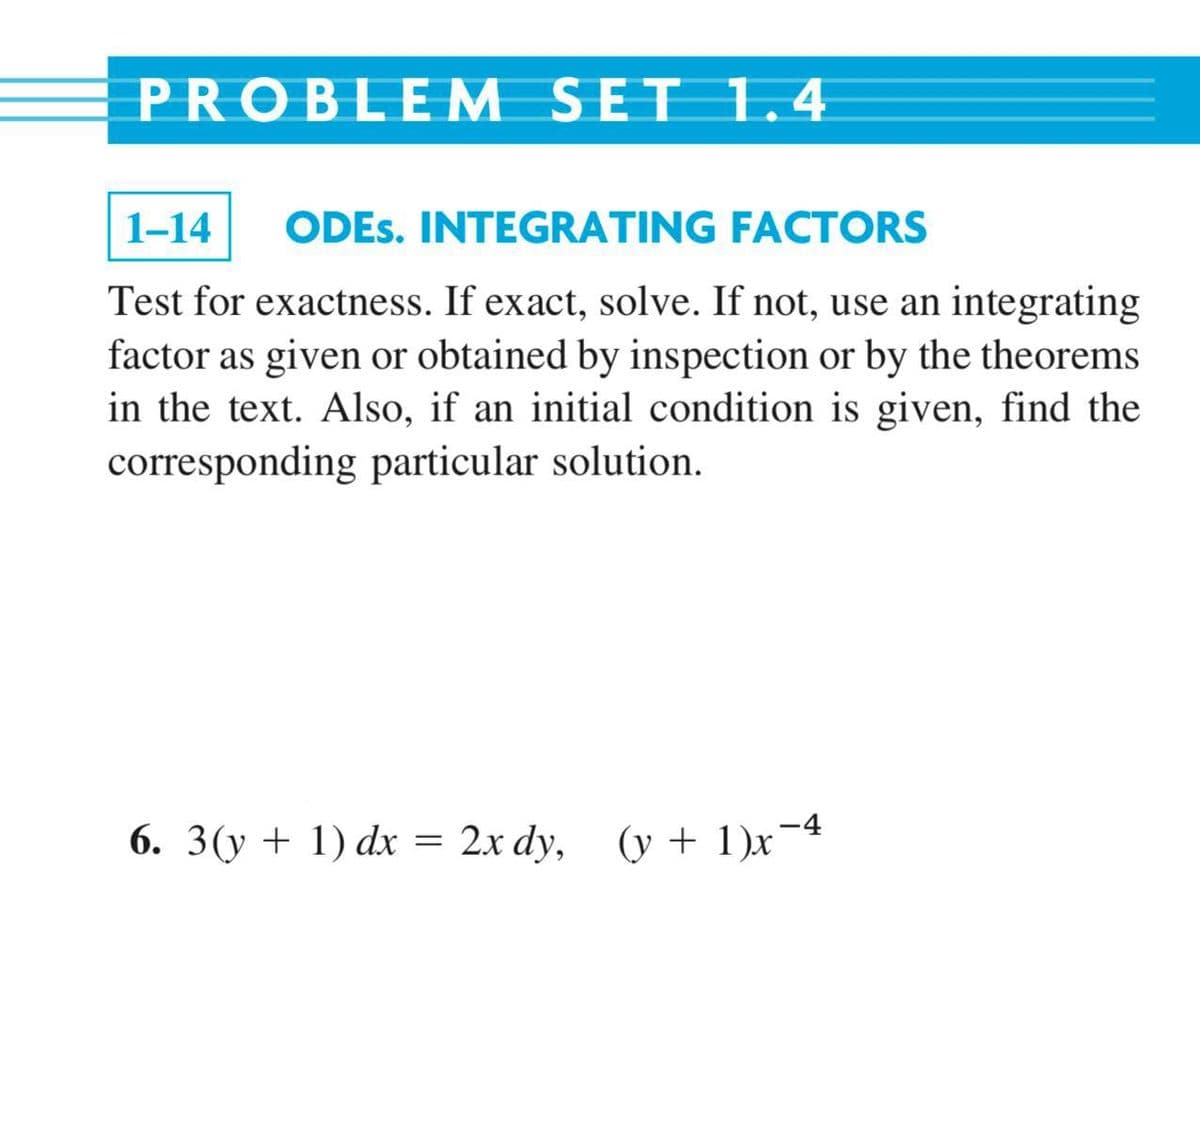 PROBLEM SET 1.4
1-14
ODES. INTEGRATING FACTORS
Test for exactness. If exact, solve. If not, use an integrating
factor as given or obtained by inspection or by the theorems
in the text. Also, if an initial condition is given, find the
corresponding particular solution.
6. 3(y + 1) dx = 2x dy, (y +1)x